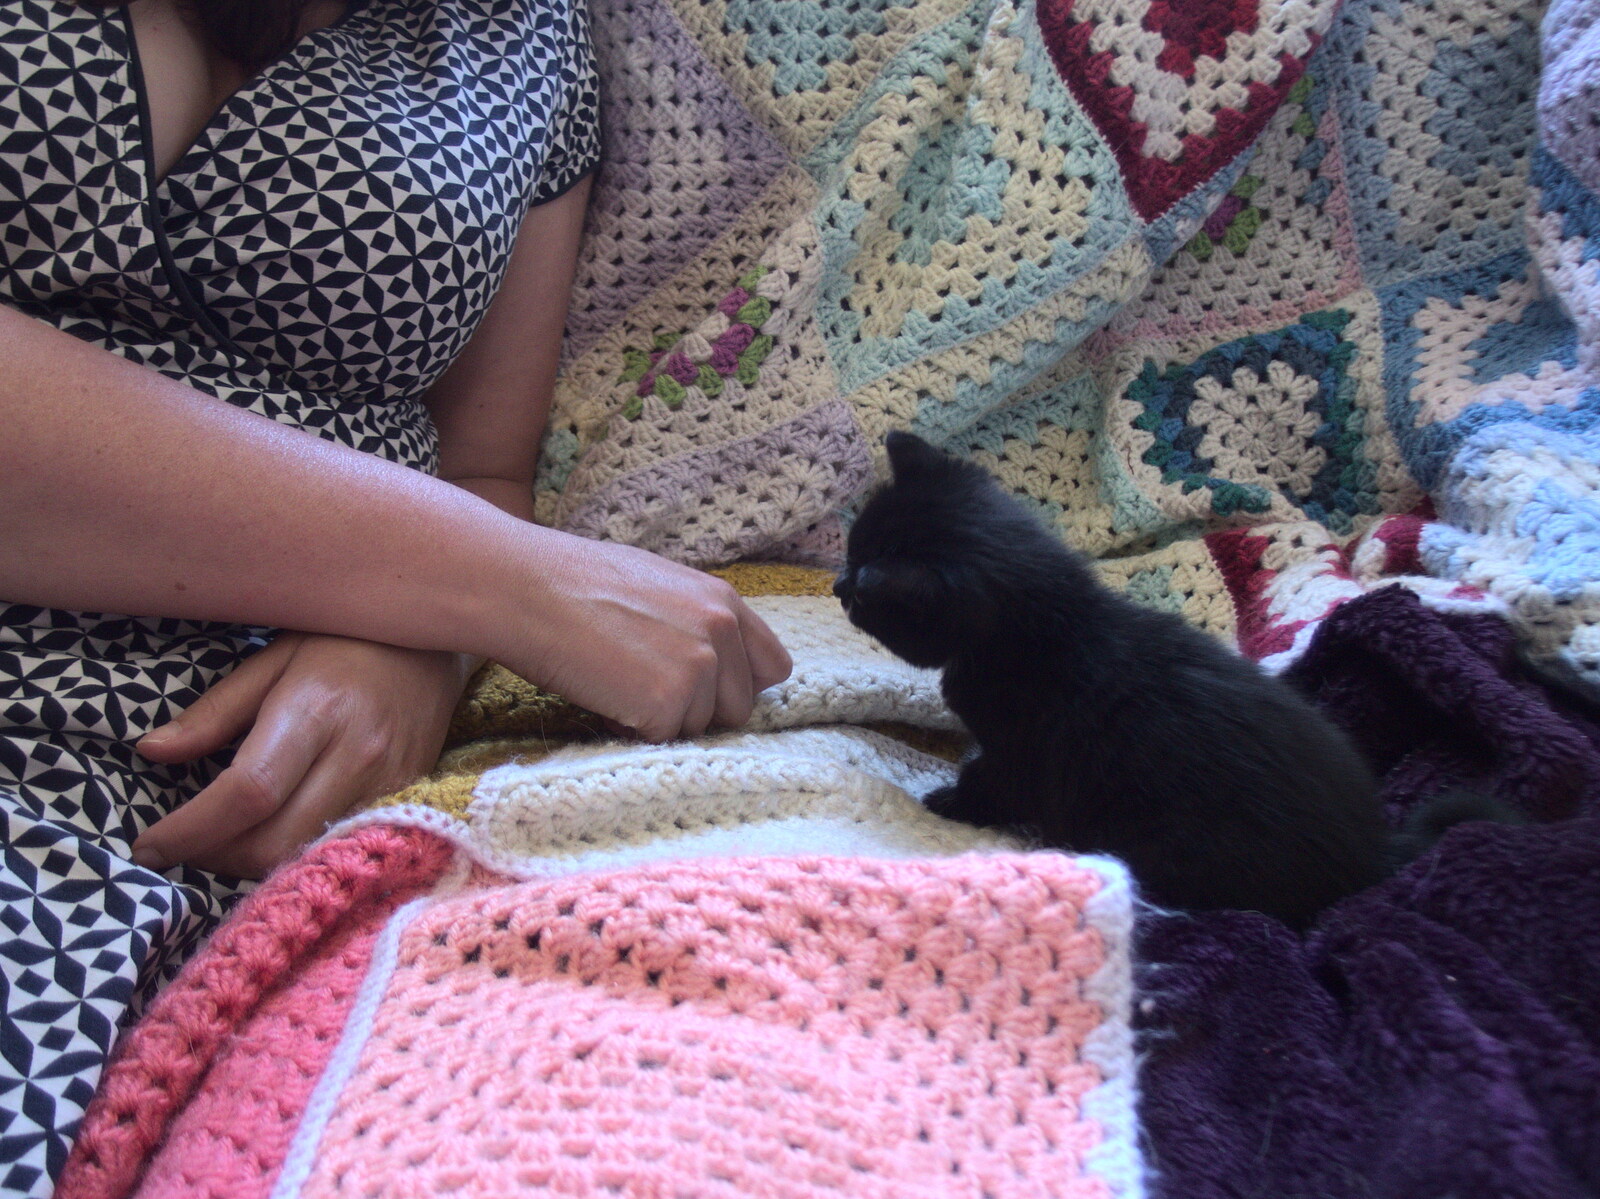 Isobel meets a kitten from A Visit to the Kittens, Scarning, Norfolk - 13th June 2021